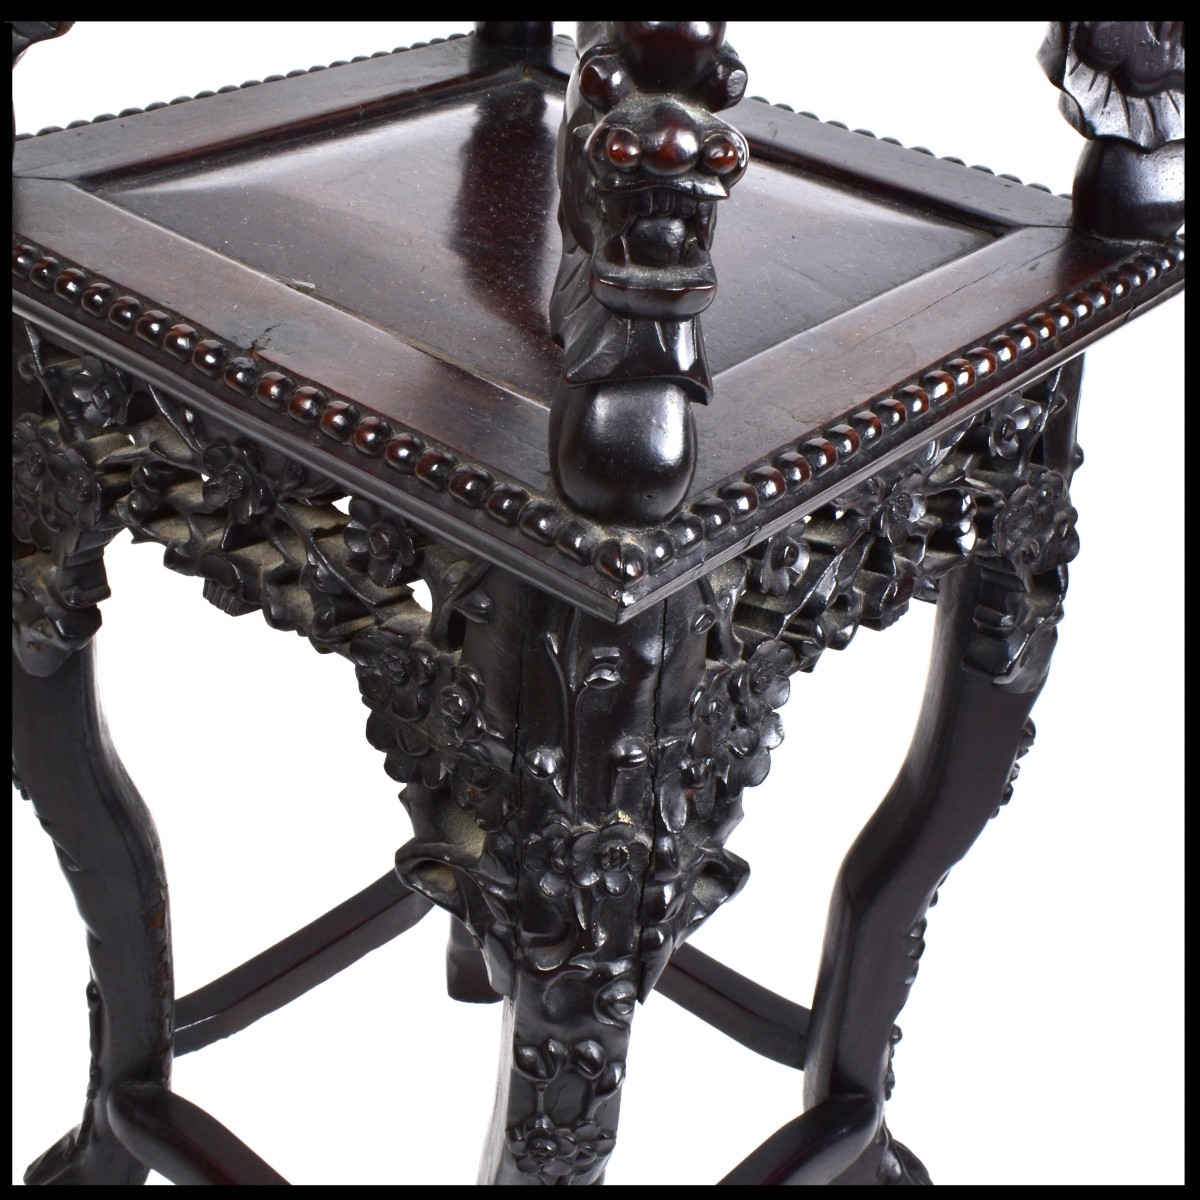 Chinese Carved Hardwood Stand